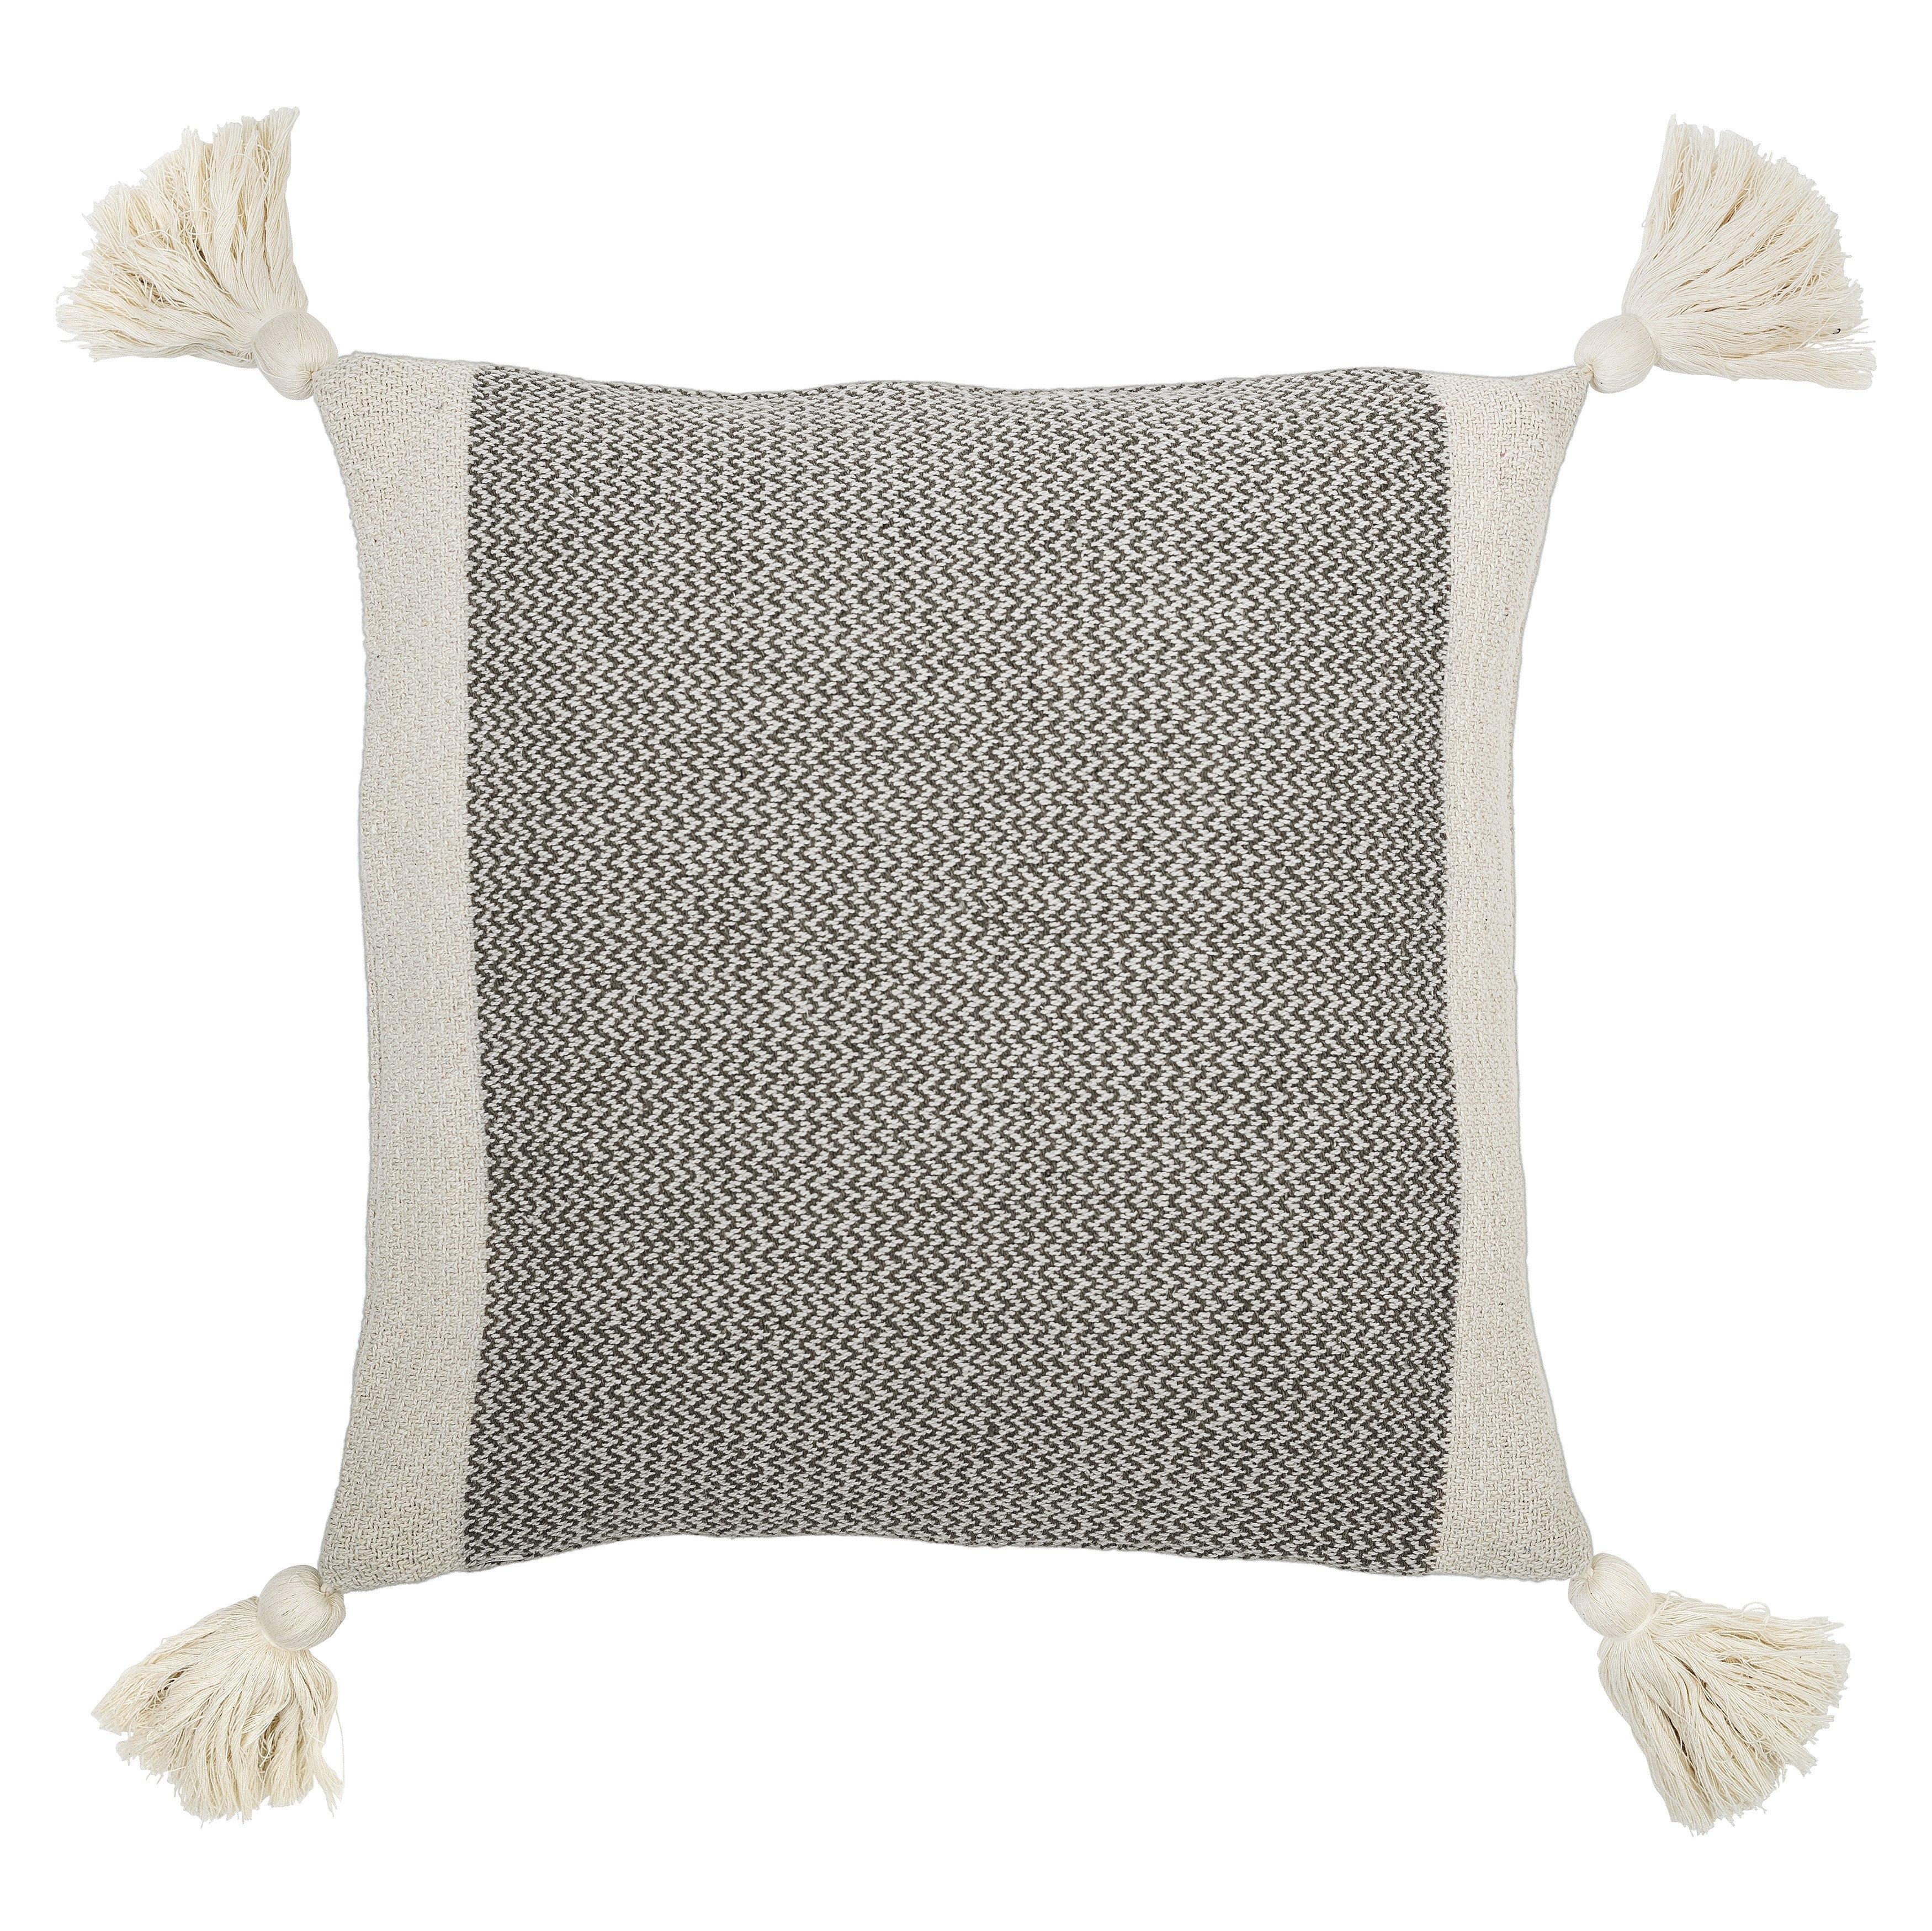 Square Grey & Cream Cotton Blend Pillow with Corner Tassels - Image 0